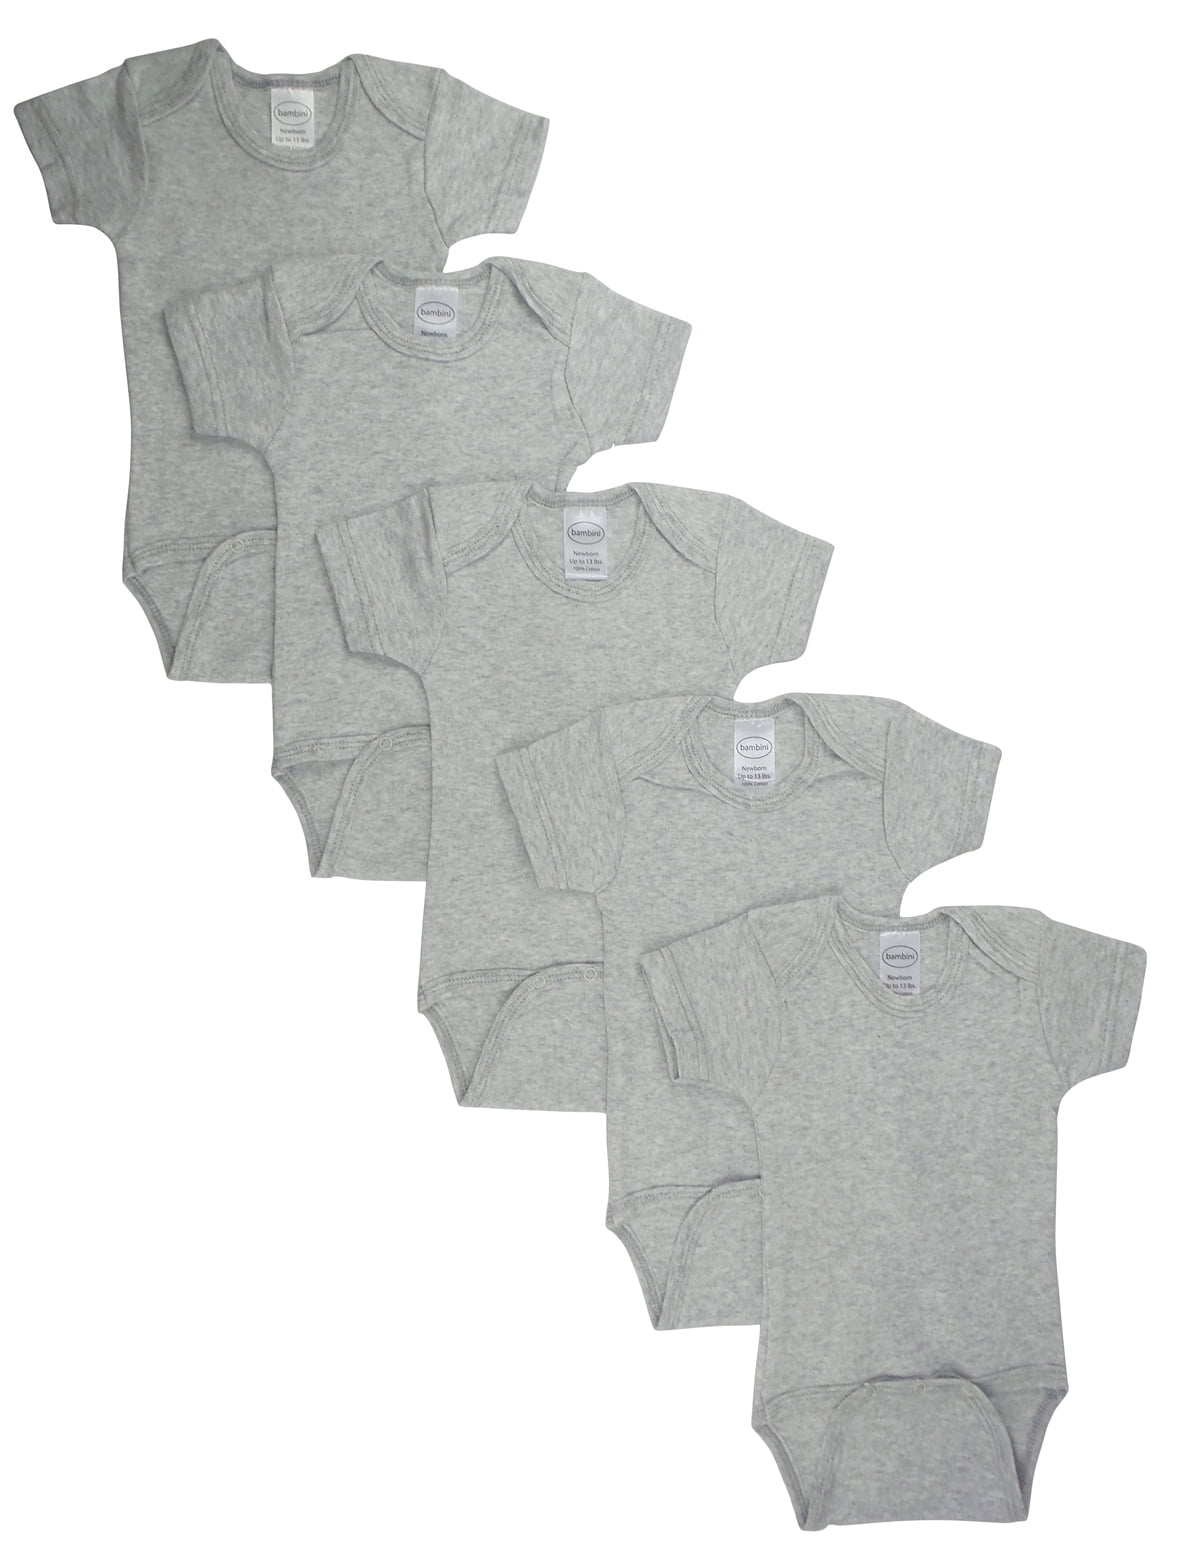 Ls-0176 Bodysuit, Gray - Small - Pack Of 3